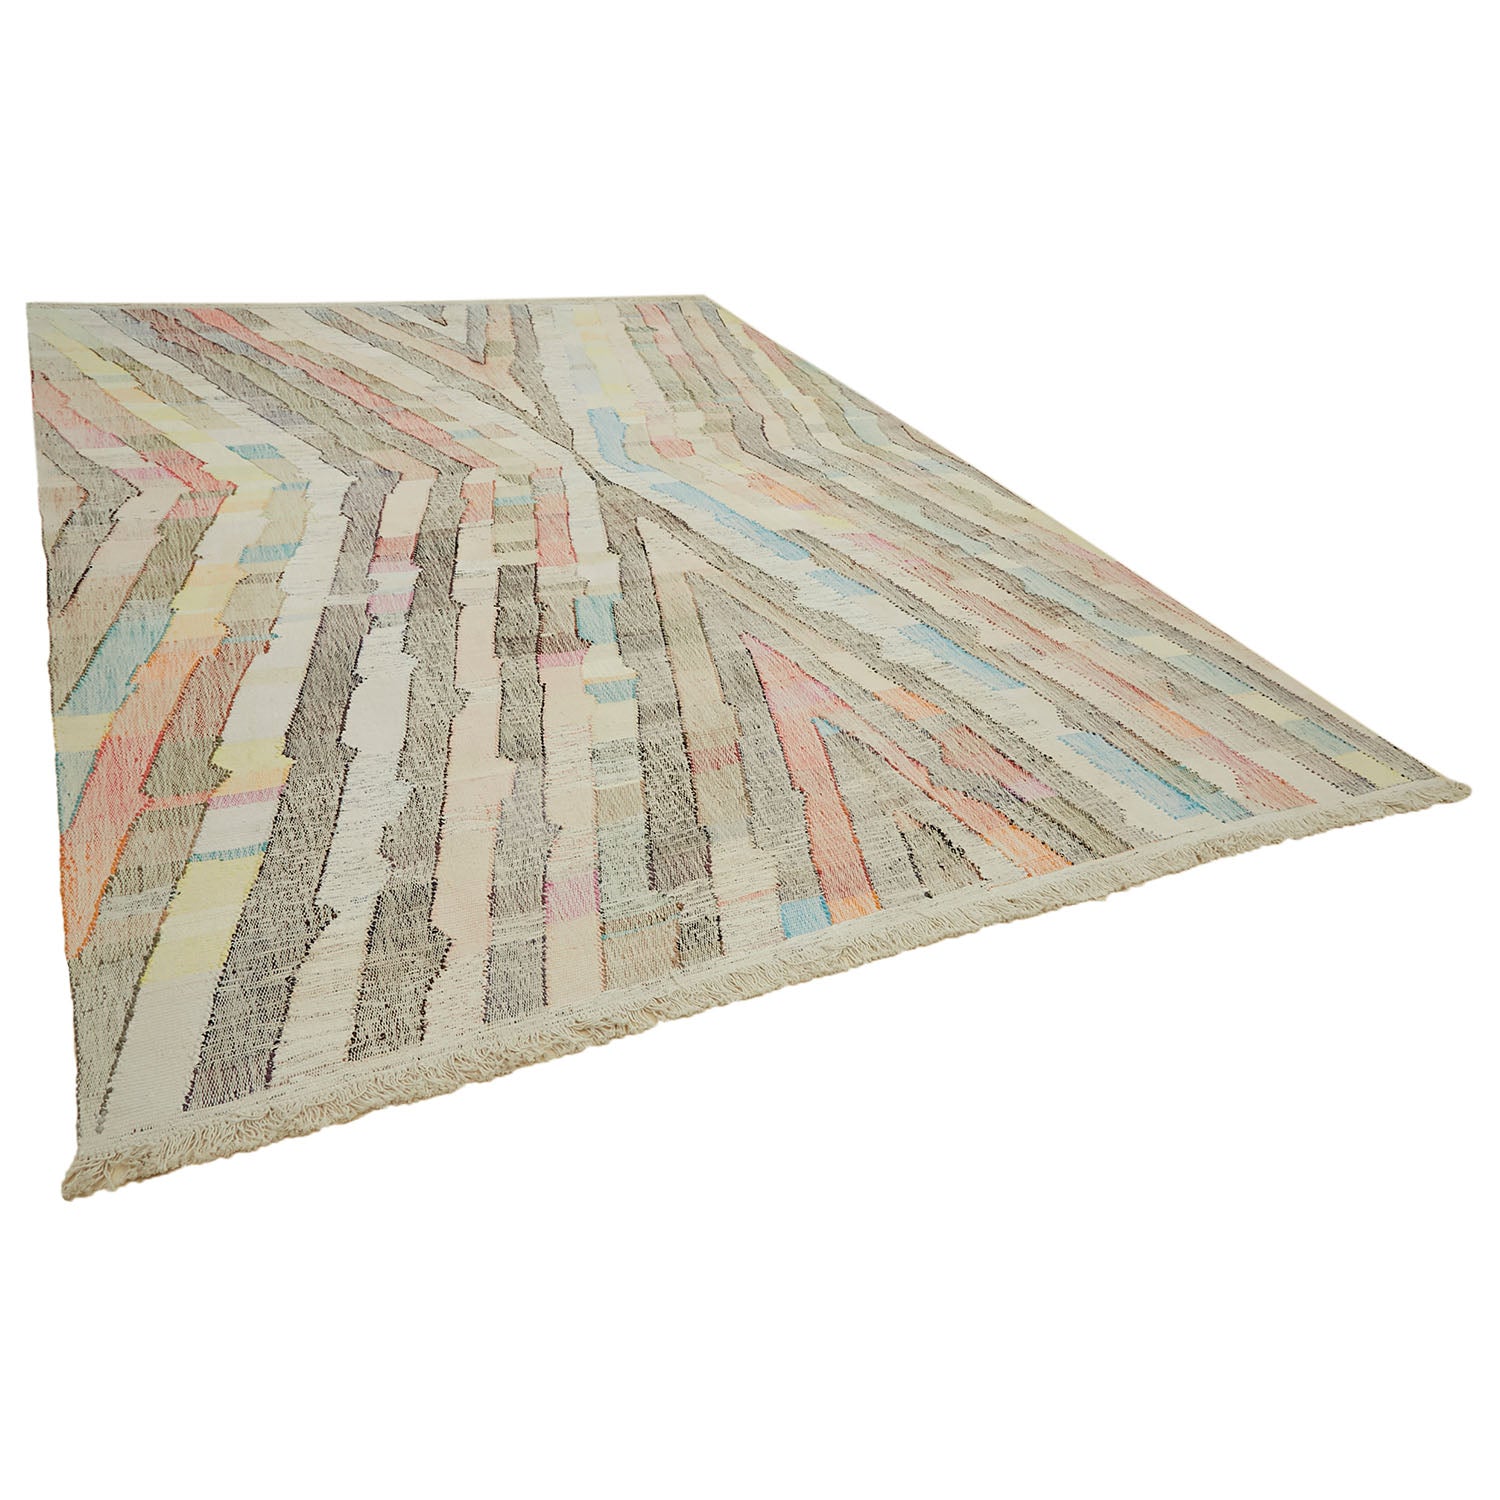 Contemporary geometric rug with pastel colors and textured striped pattern.